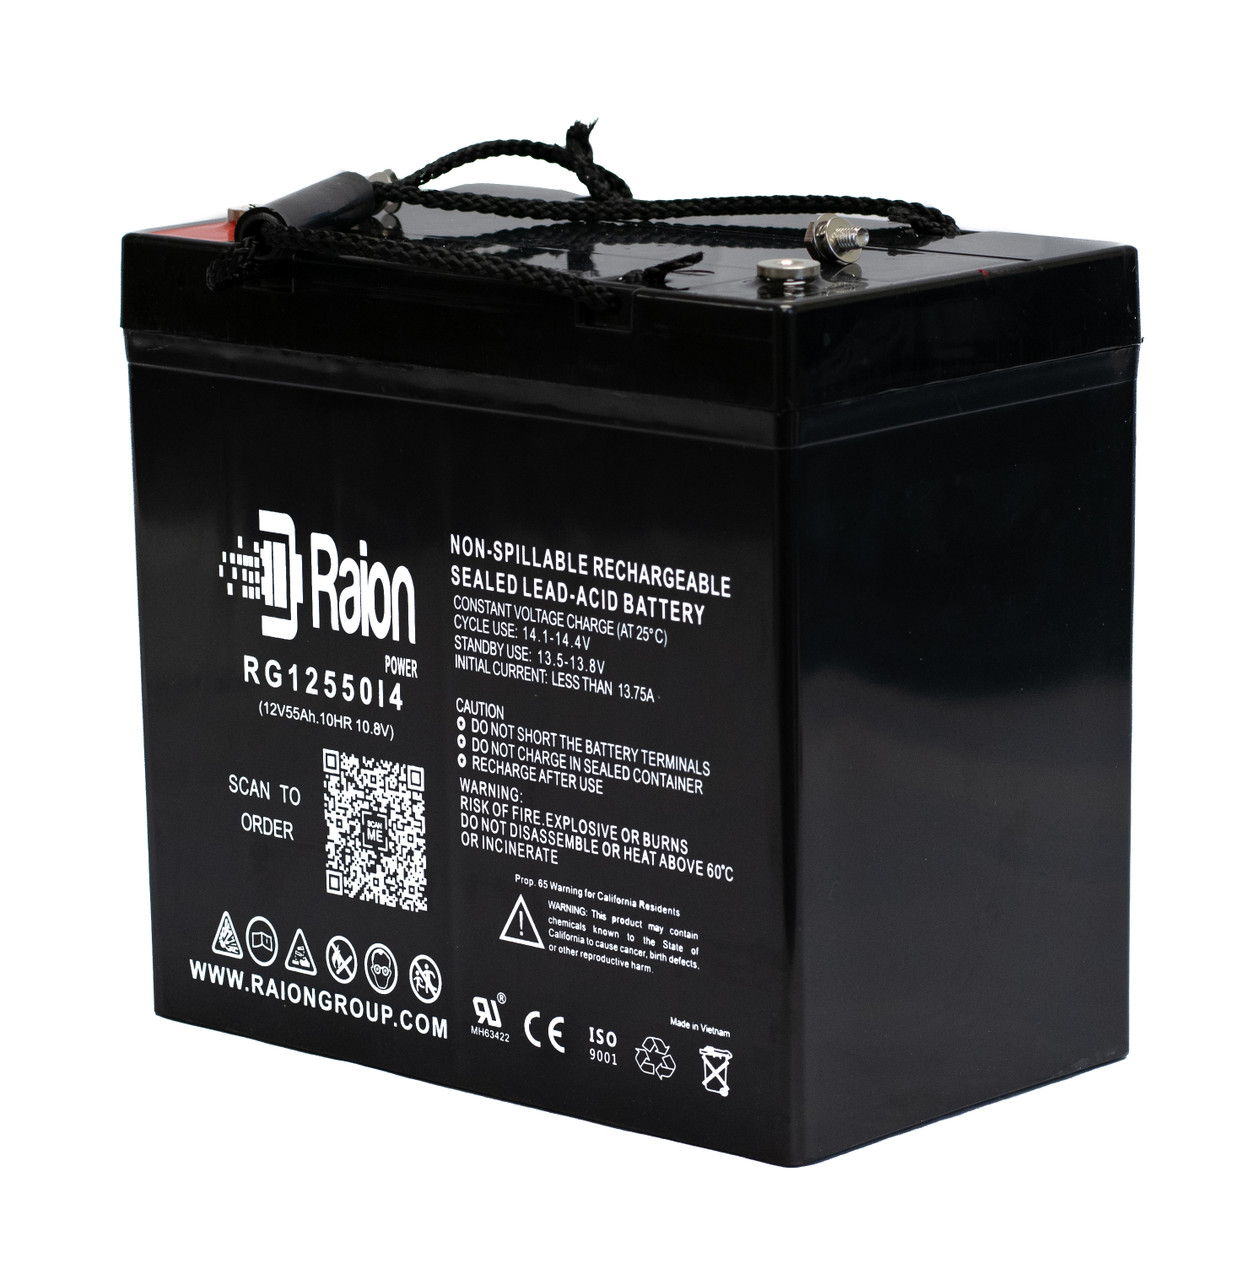 Raion Power 12V 55Ah 22NF Mobility Scooter Battery Replacement for Everest & Jennings Model 34 Adult